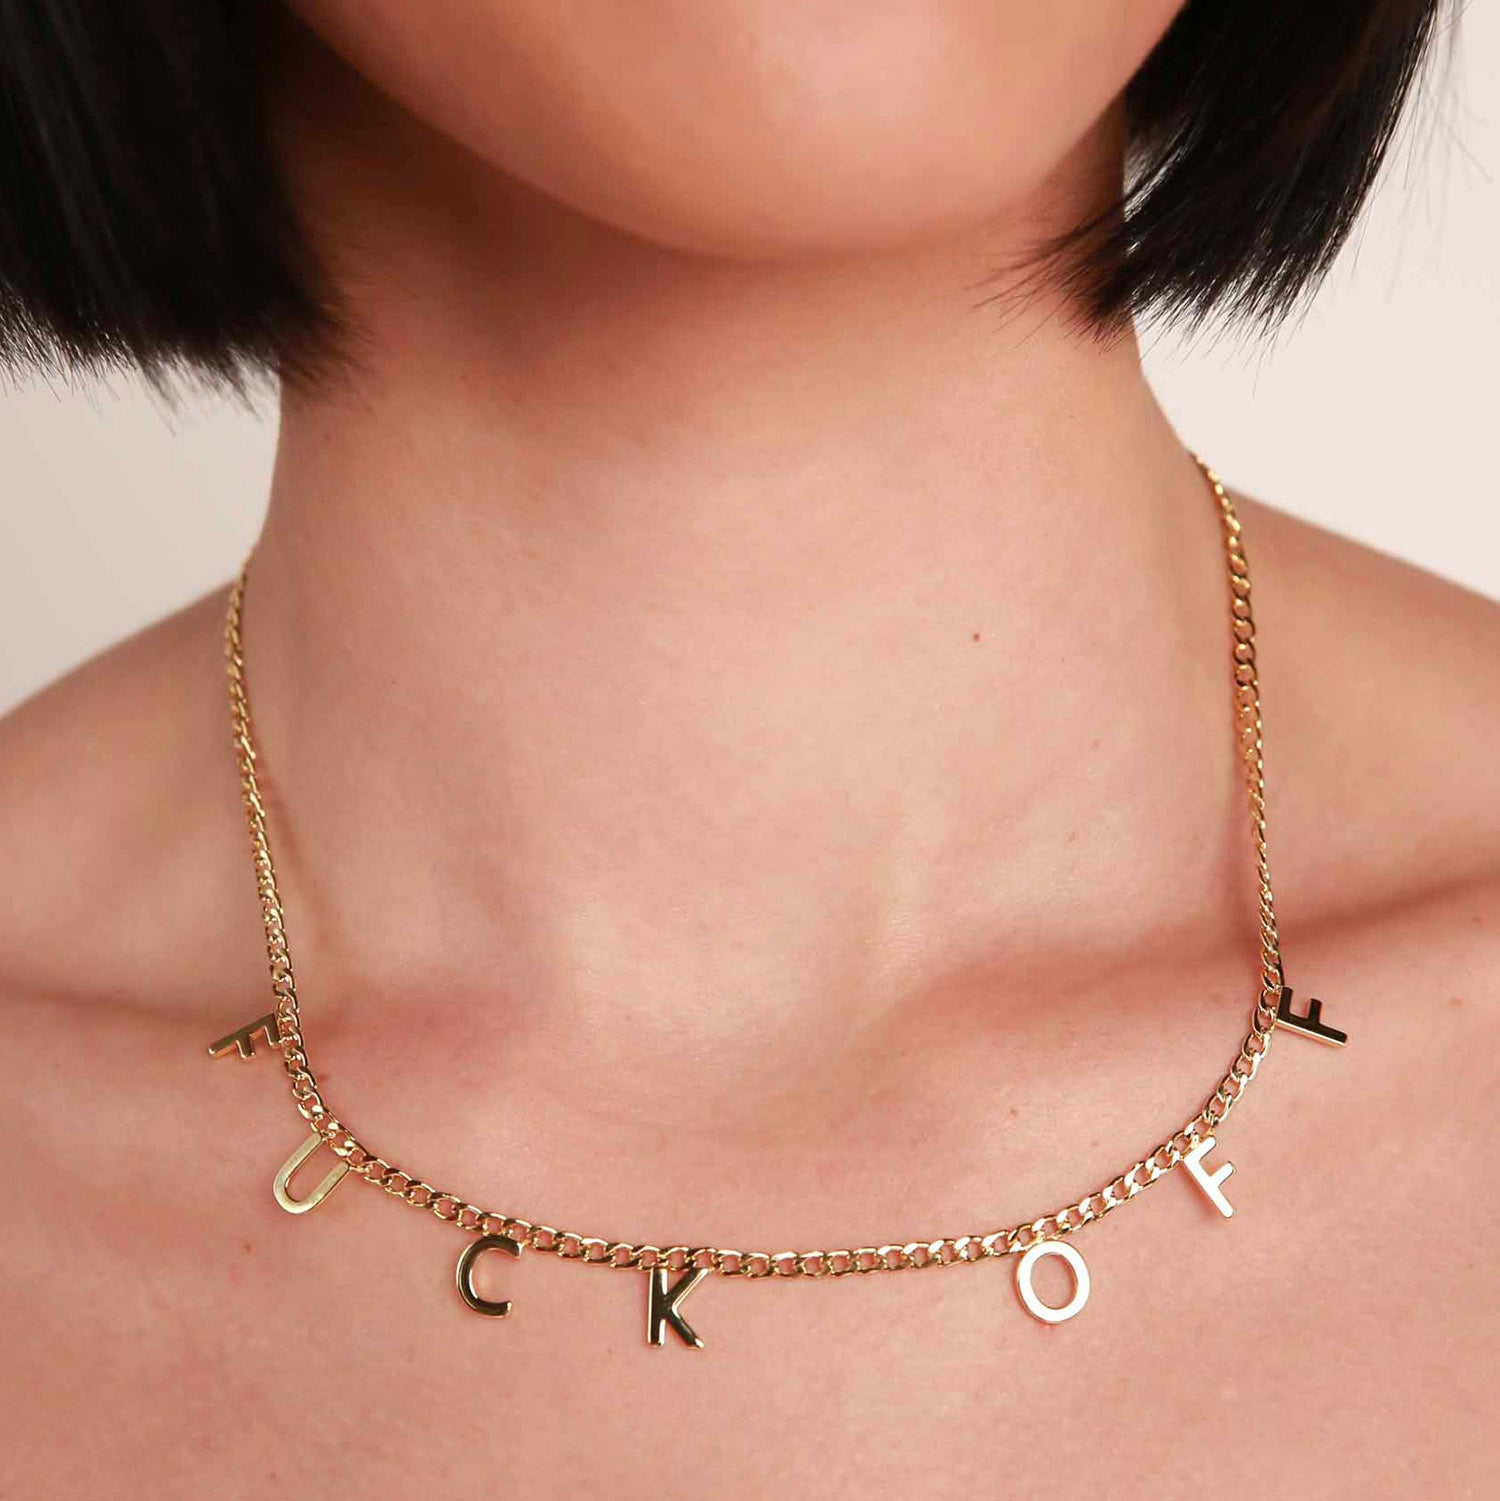 Fuck Off Necklace